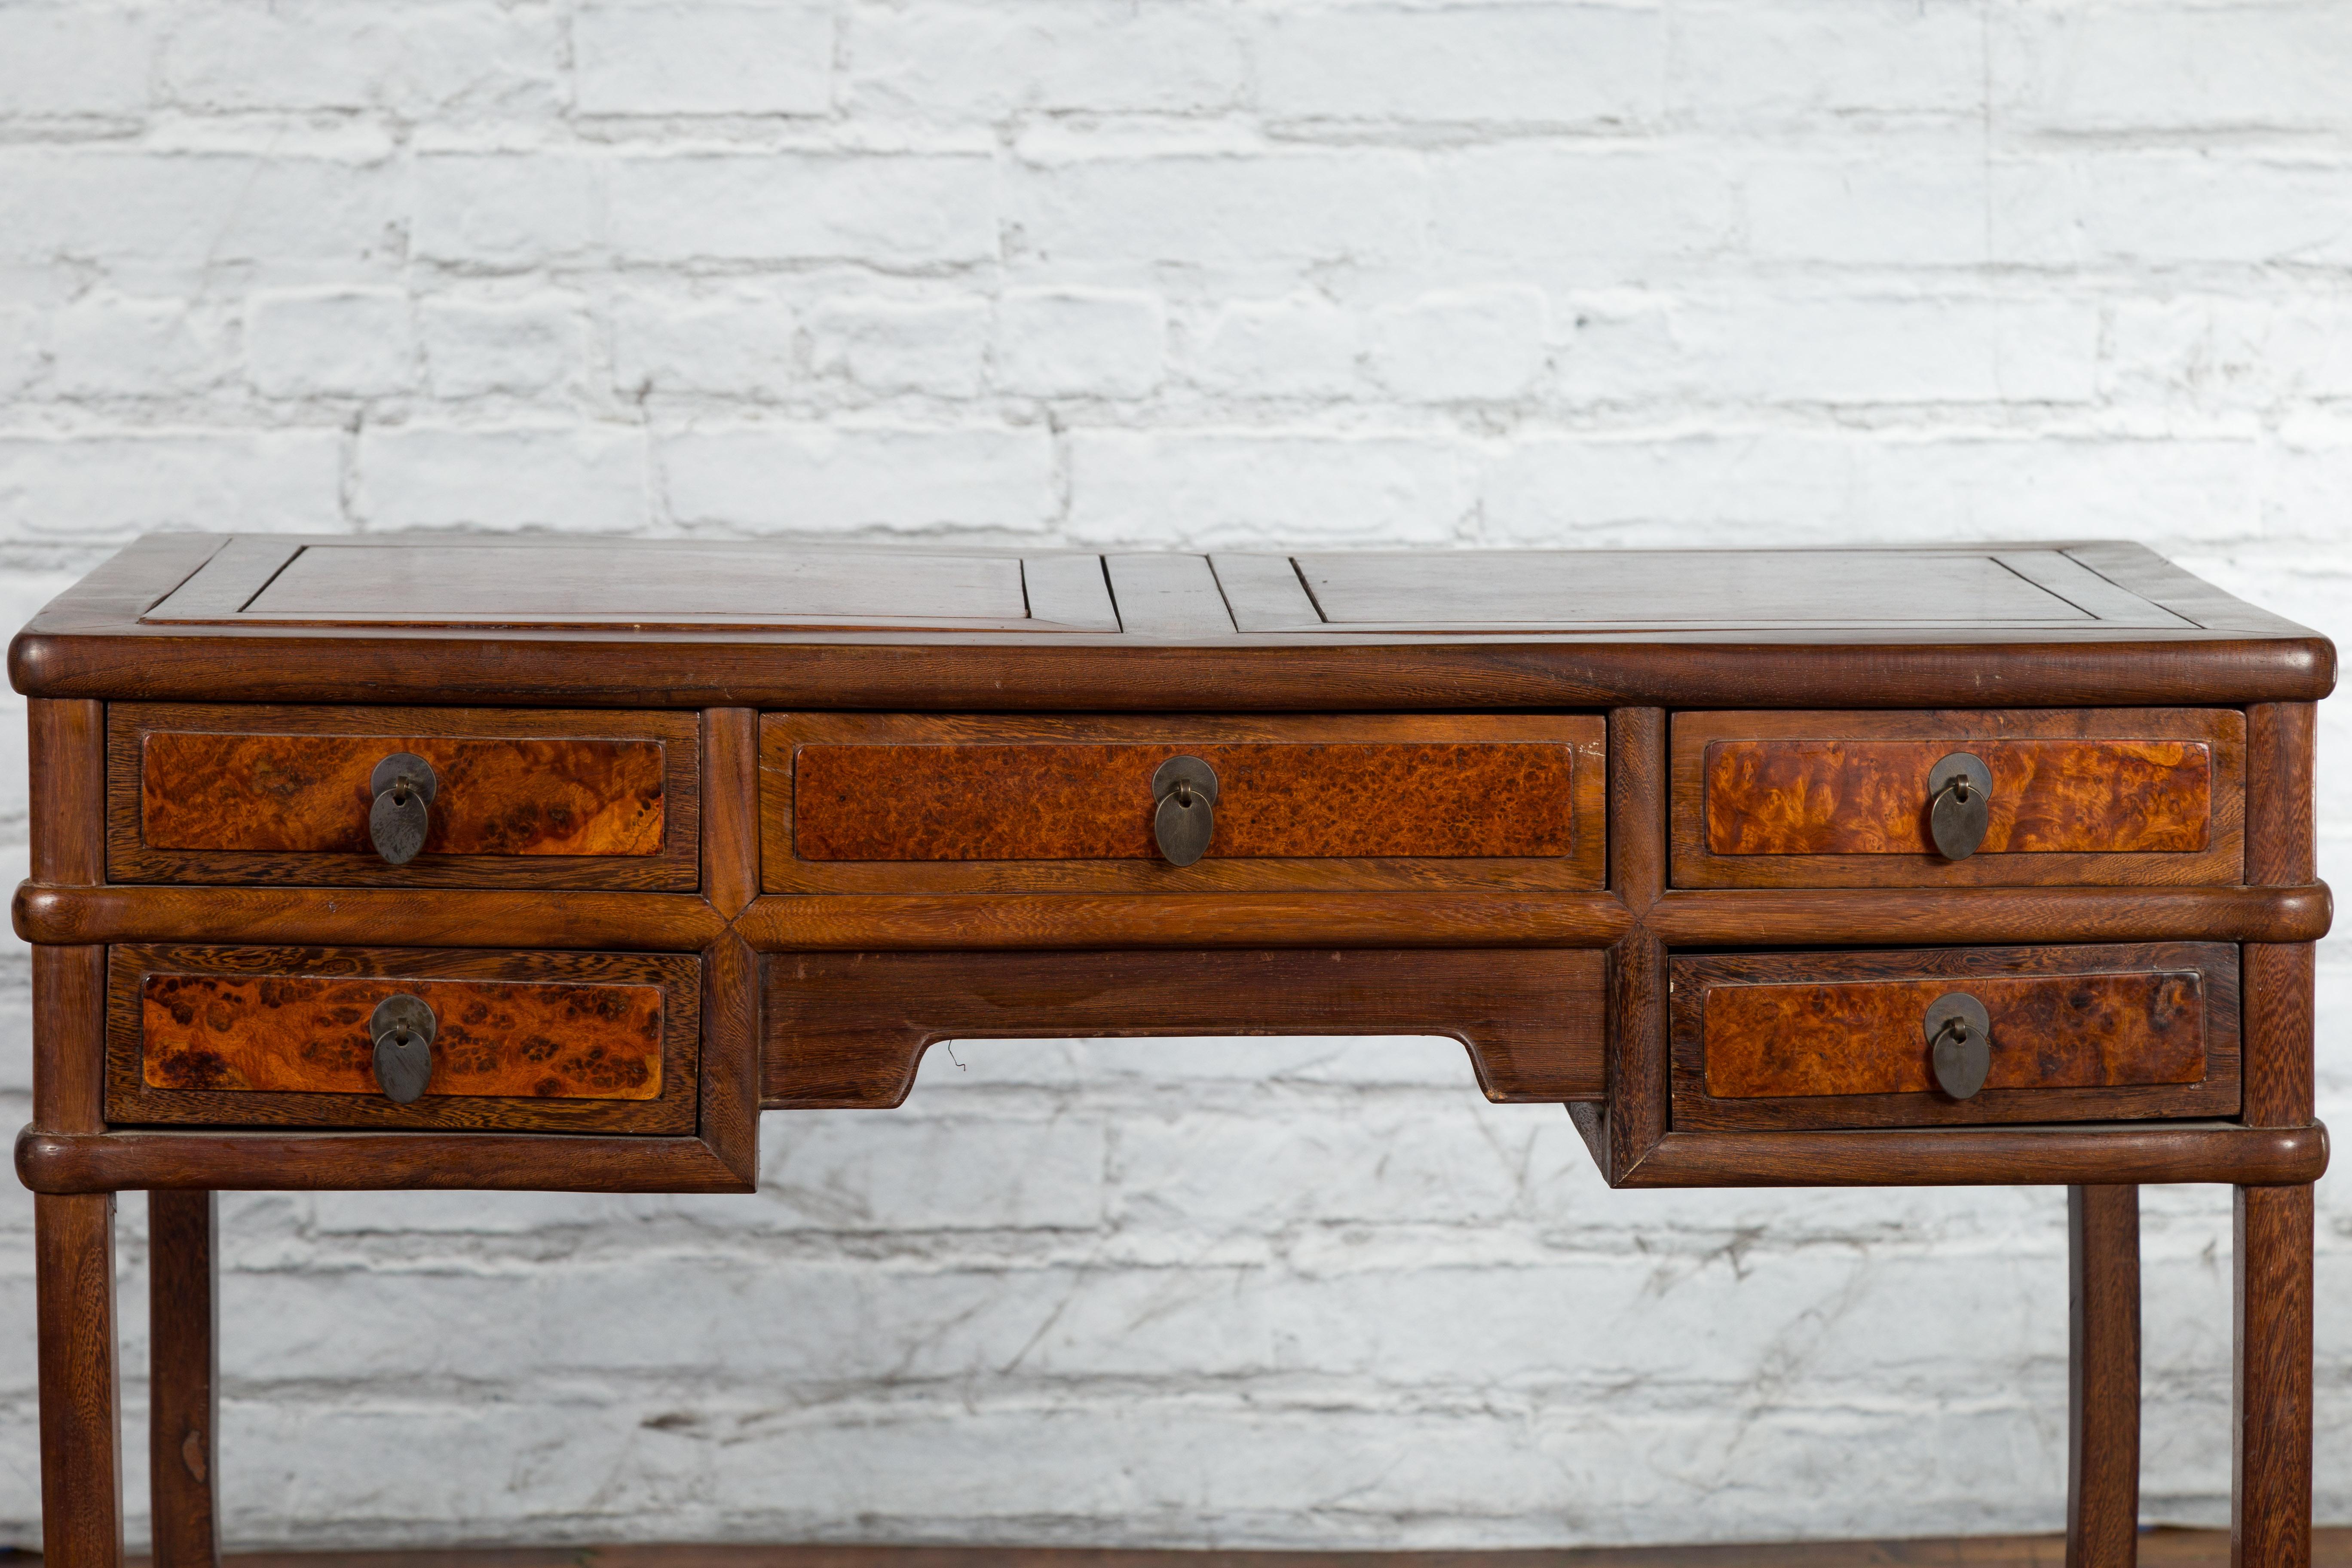 Qing Dynasty 19th Century Desk with Burlwood Top, Drawers and Cracked Ice Shelf For Sale 1